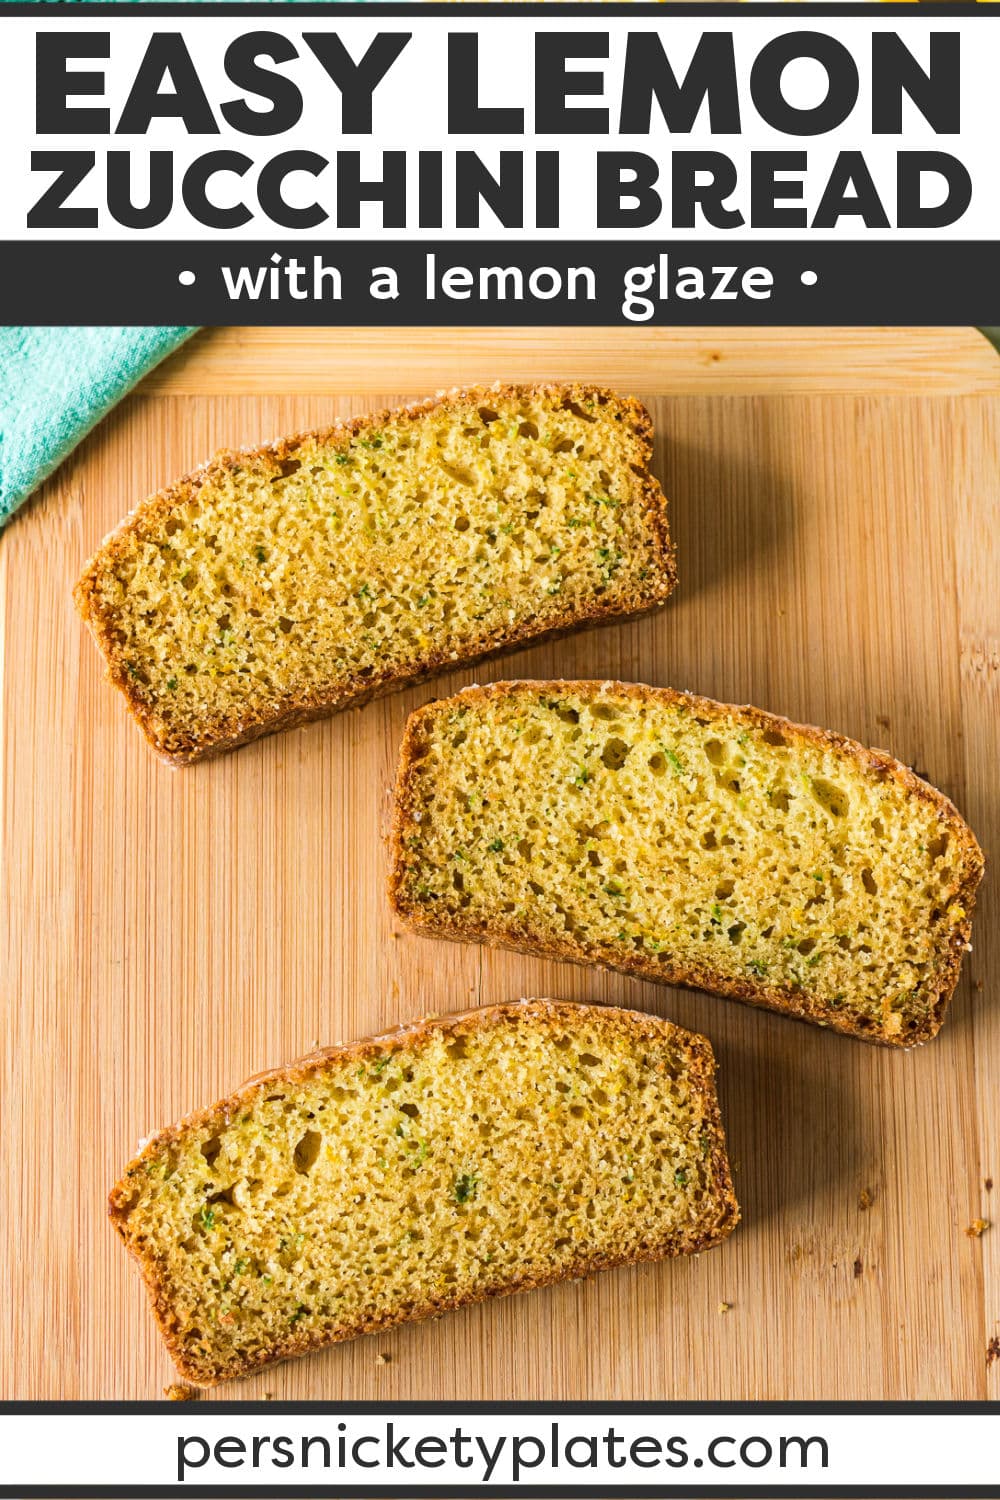 This easy lemon zucchini bread comes together with simple baking staples and is ready in just 1 hour! It’s moist, tender, and loaded with flecks of zucchini and lemon zest so every delicious bite has a delightful balance of sweetness and citrus with plenty of grated zucchini for moisture. It’s the perfect breakfast, snack, or dessert any day of the week! | www.persnicketyplates.com